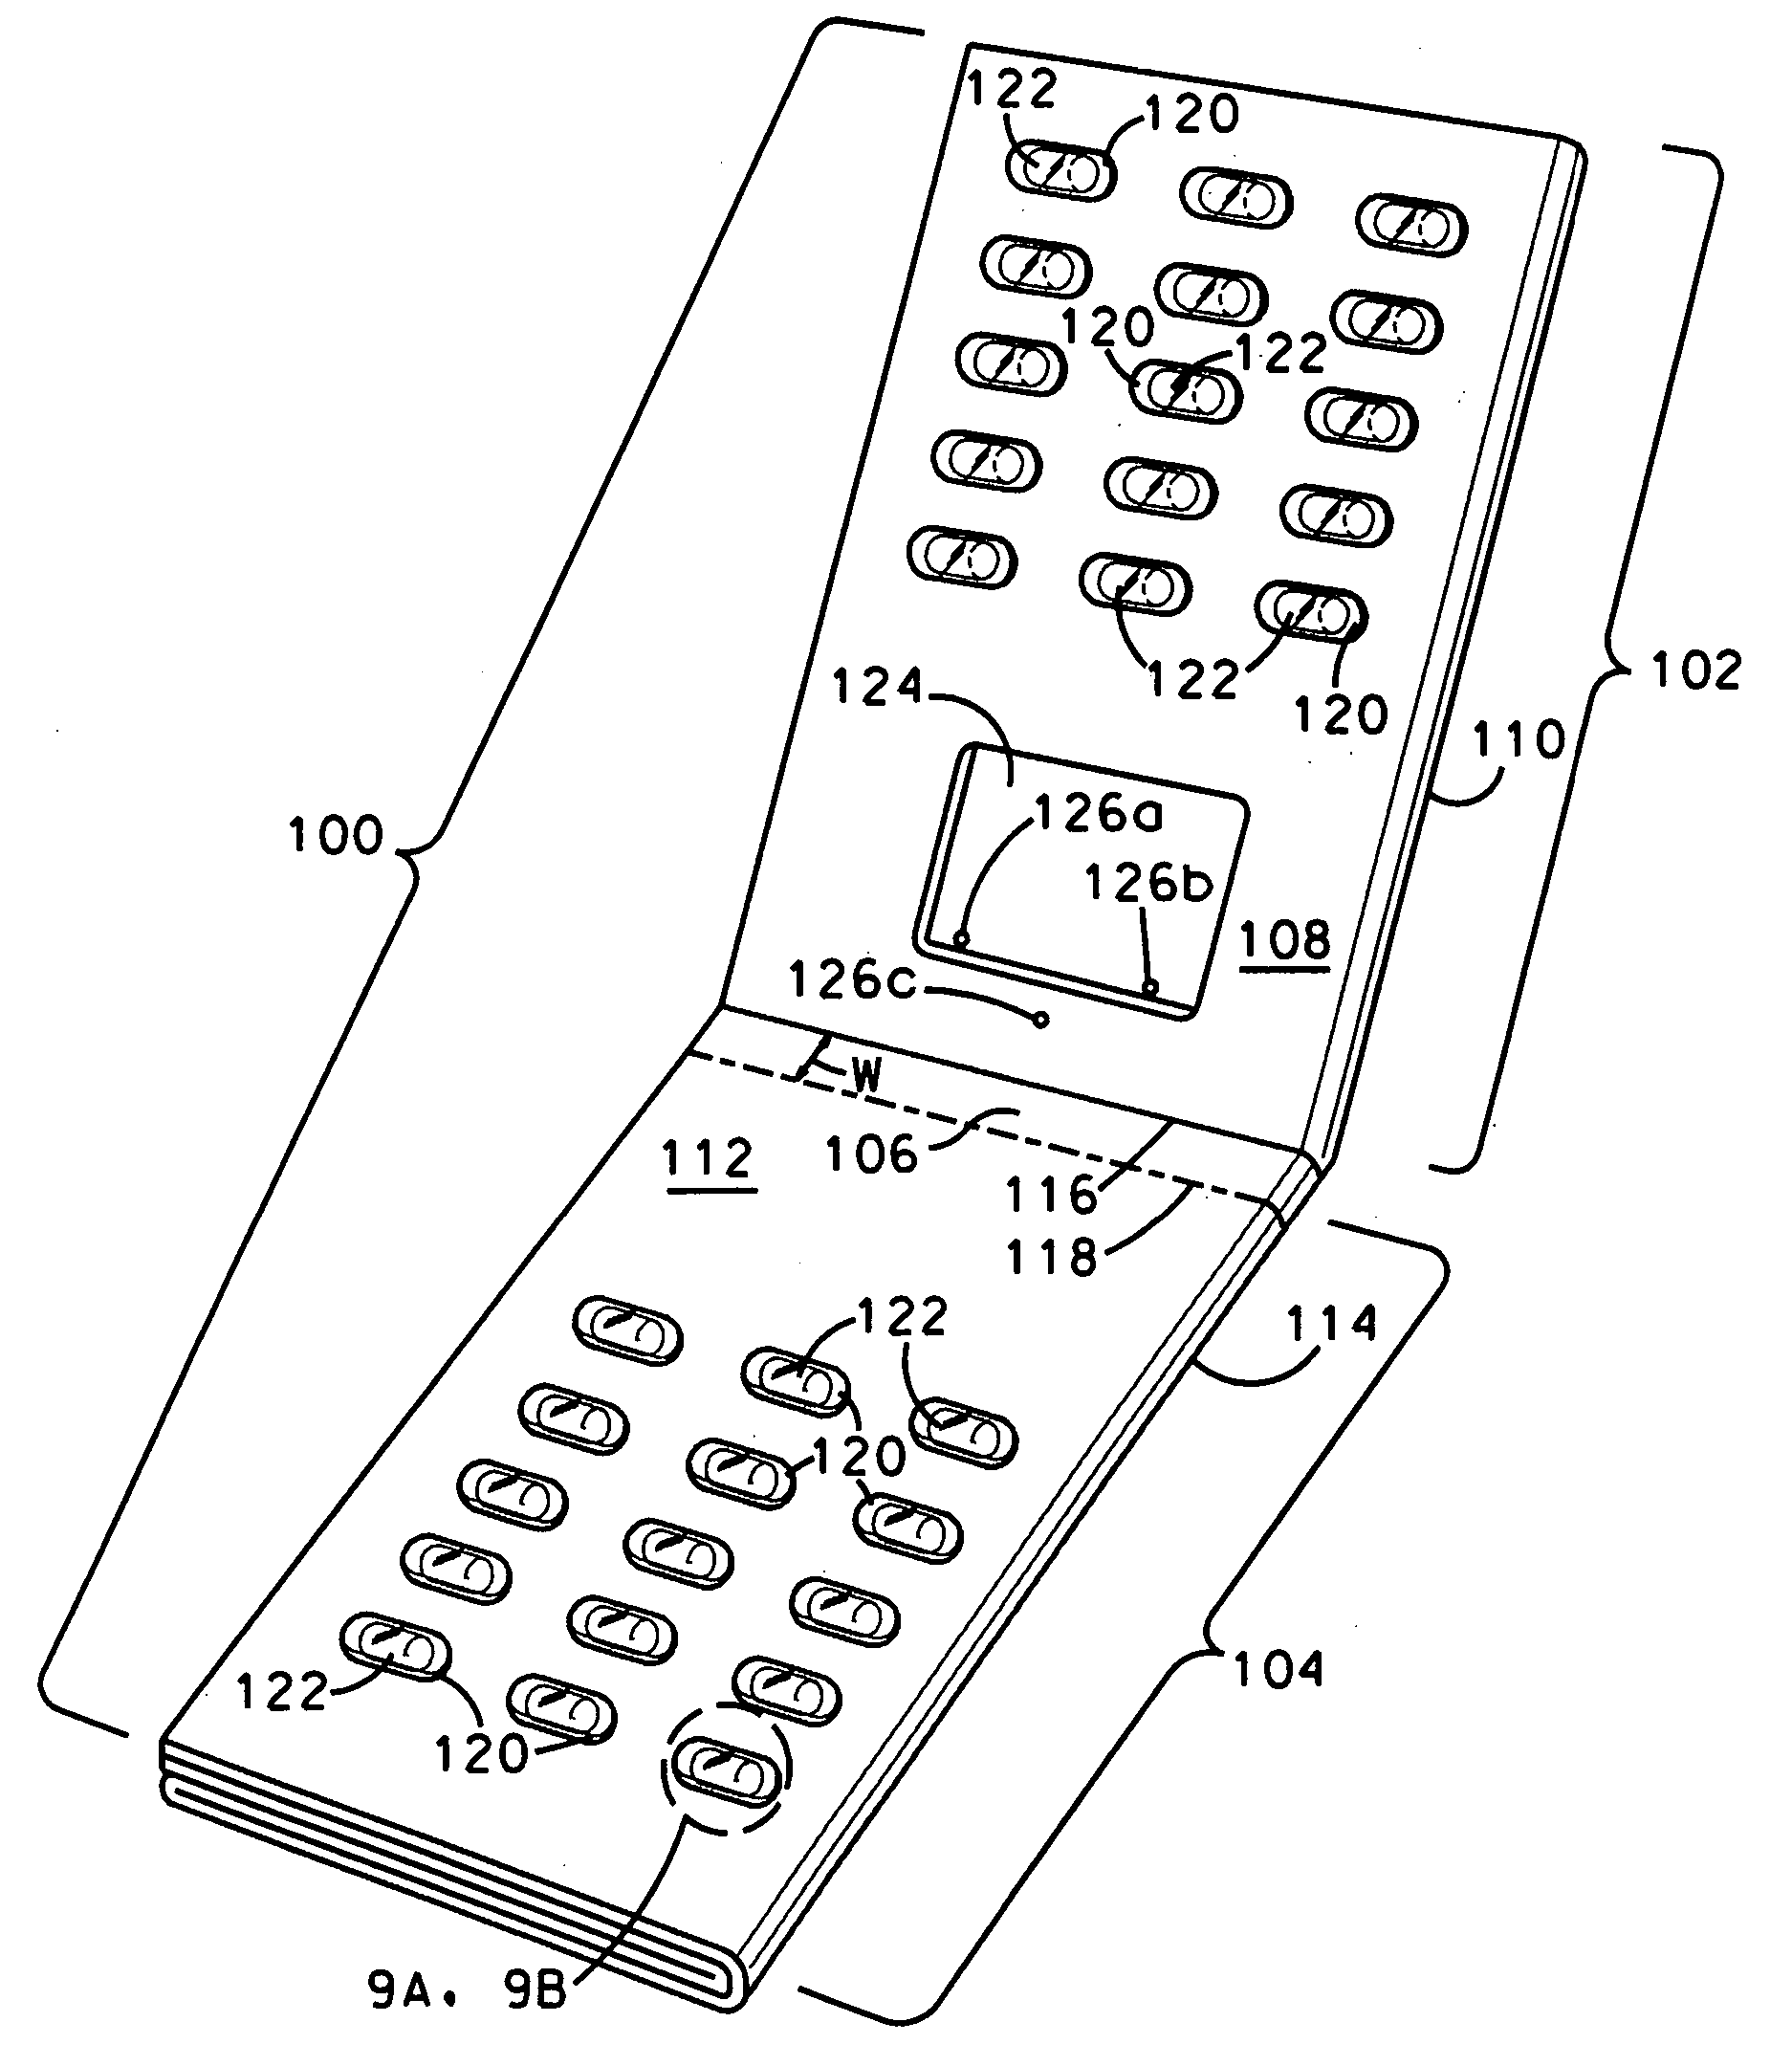 Momentary switch integrated in packaging of an article